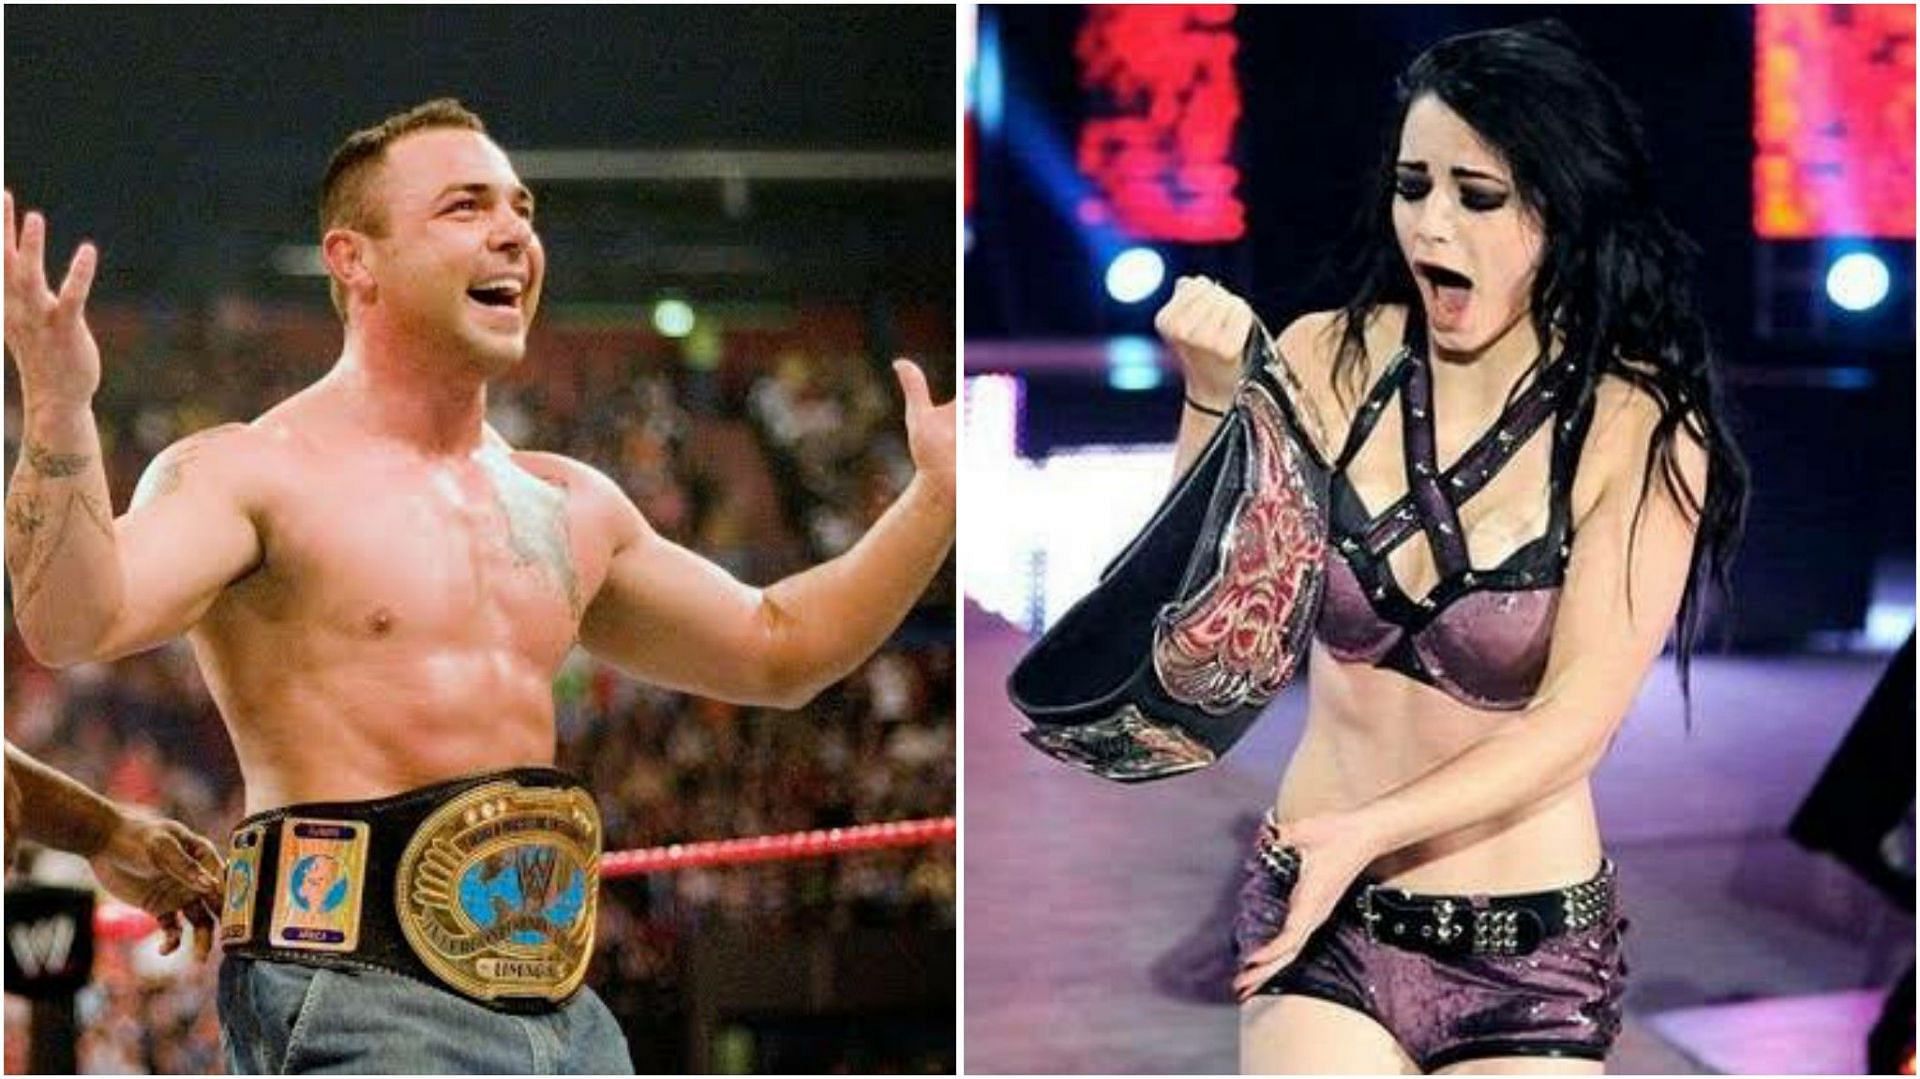 Both Santino Marella and Paige are retired at this point.